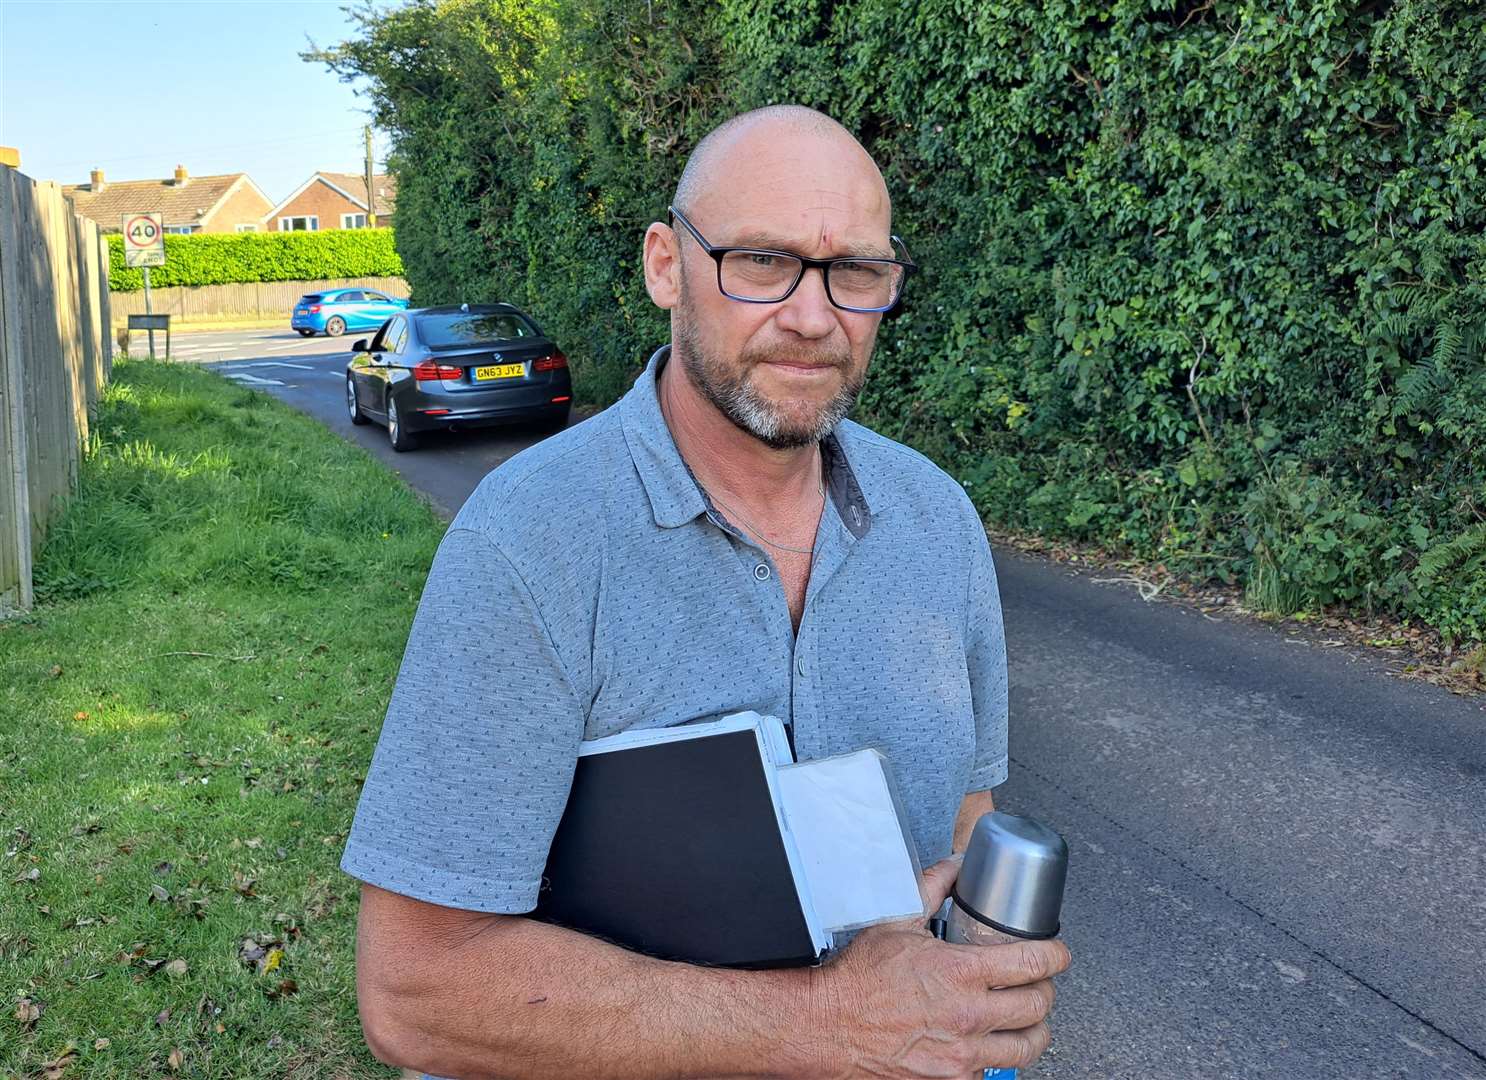 Neighbour David Evans at Cauldham Lane, Capel-le-Ferne, says the “infrastructure is just not there for this development"